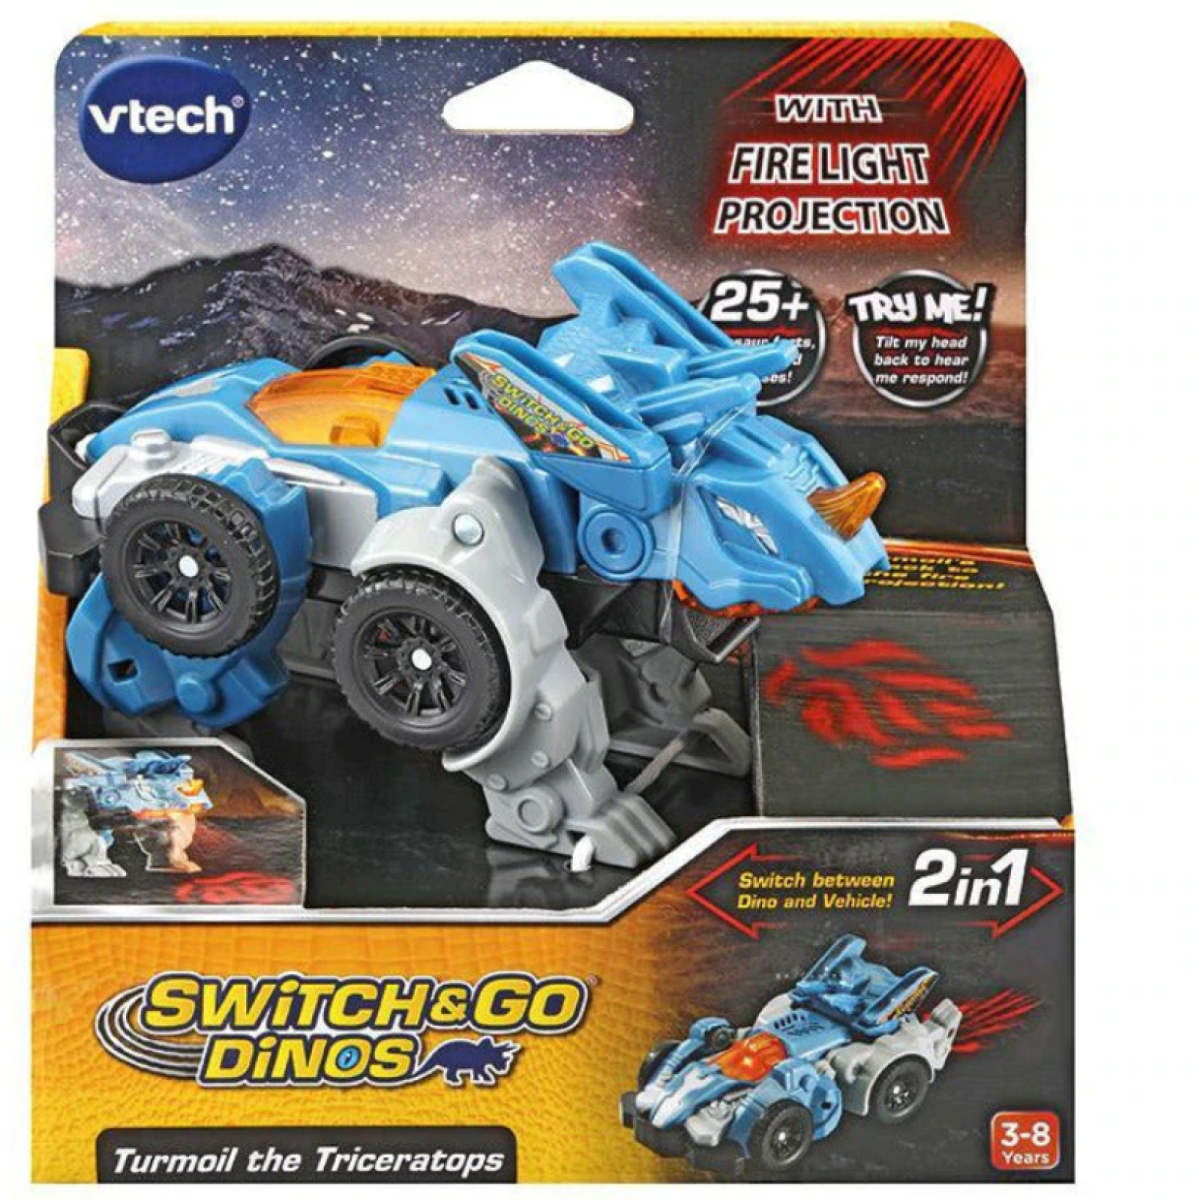 User manual Vtech Switch & Go Dinos (English - 12 pages)